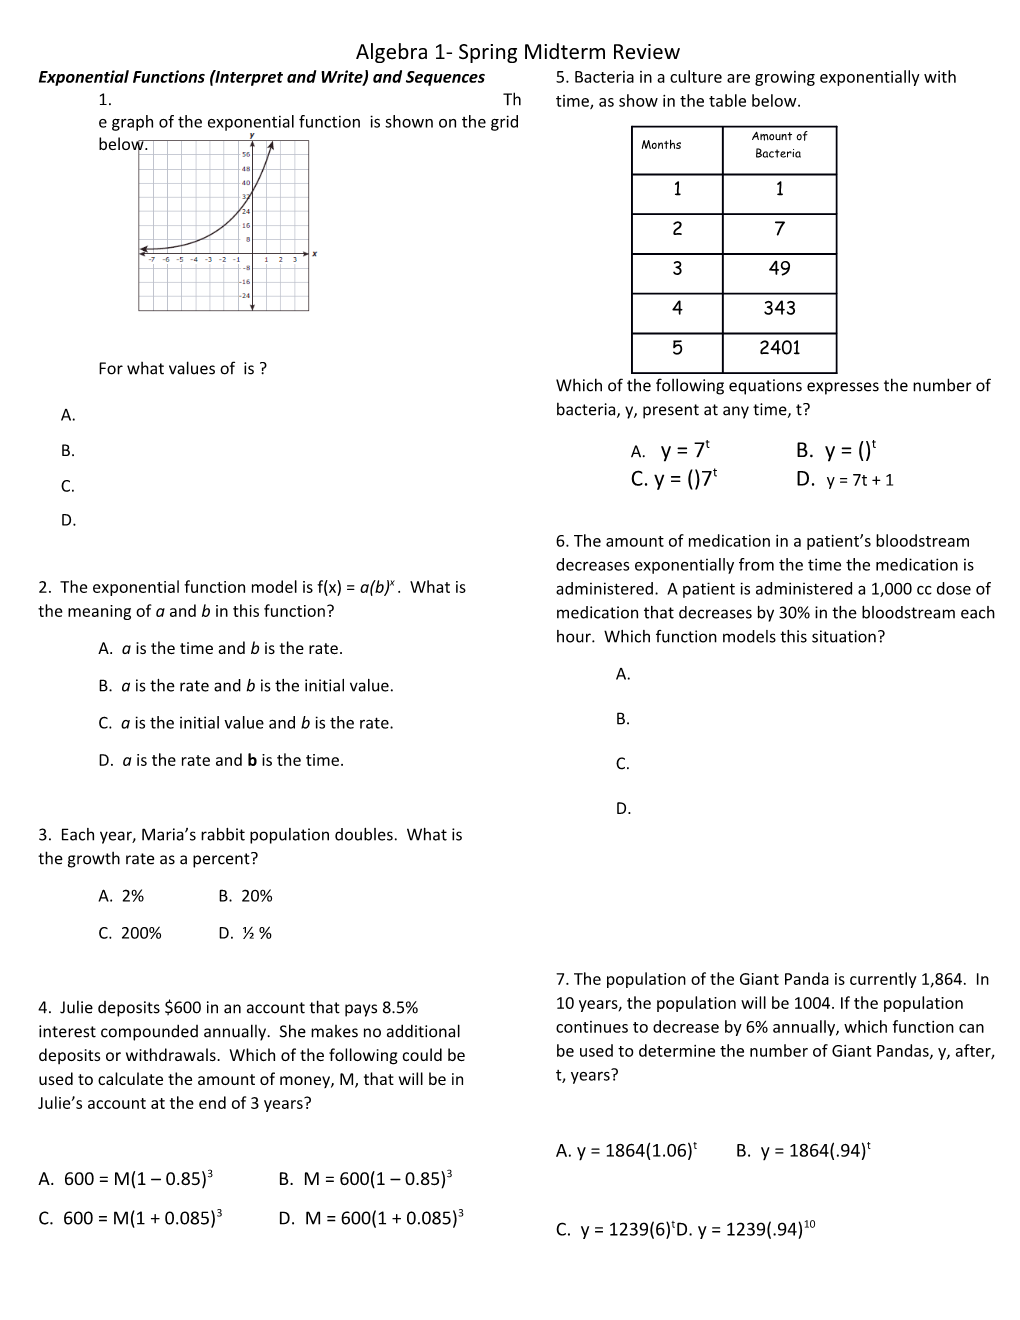 Exponential Functions (Interpret and Write) and Sequences